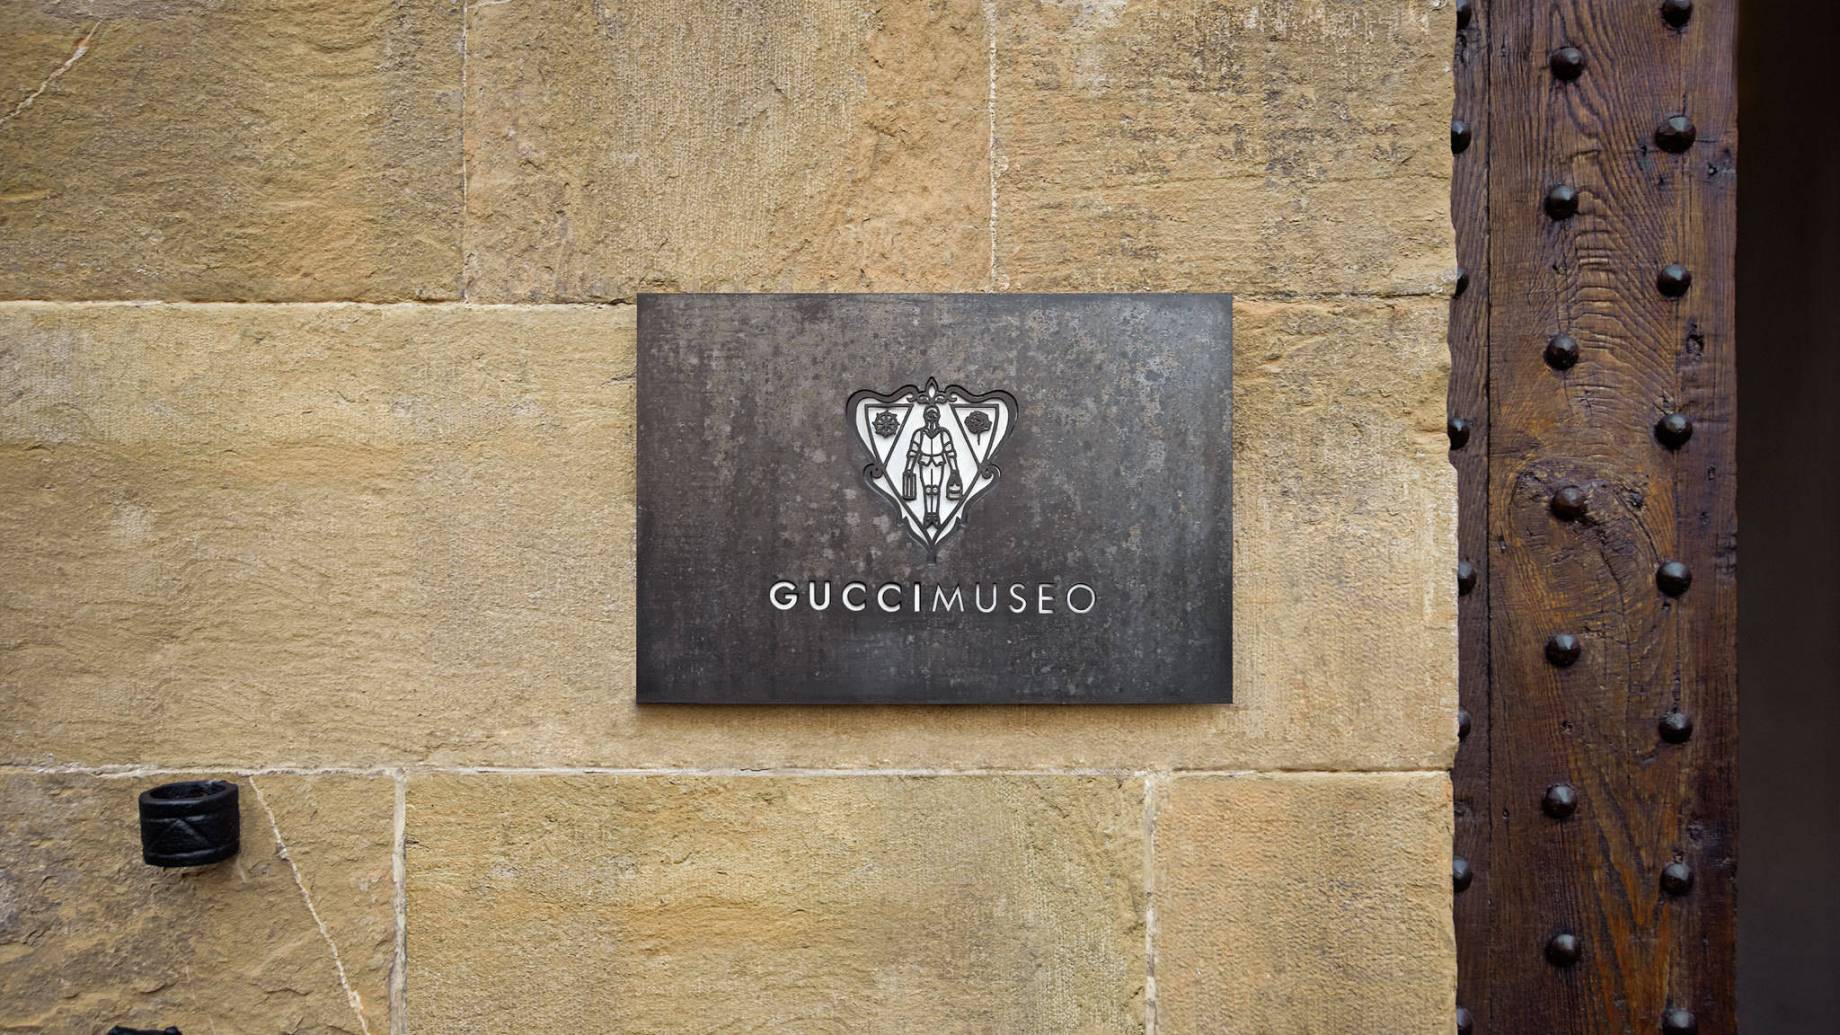 GUCCI MUSEO:THE BEST CAFE WITH FASHION MUSEUM | FLORENCE FASHIONRAIN